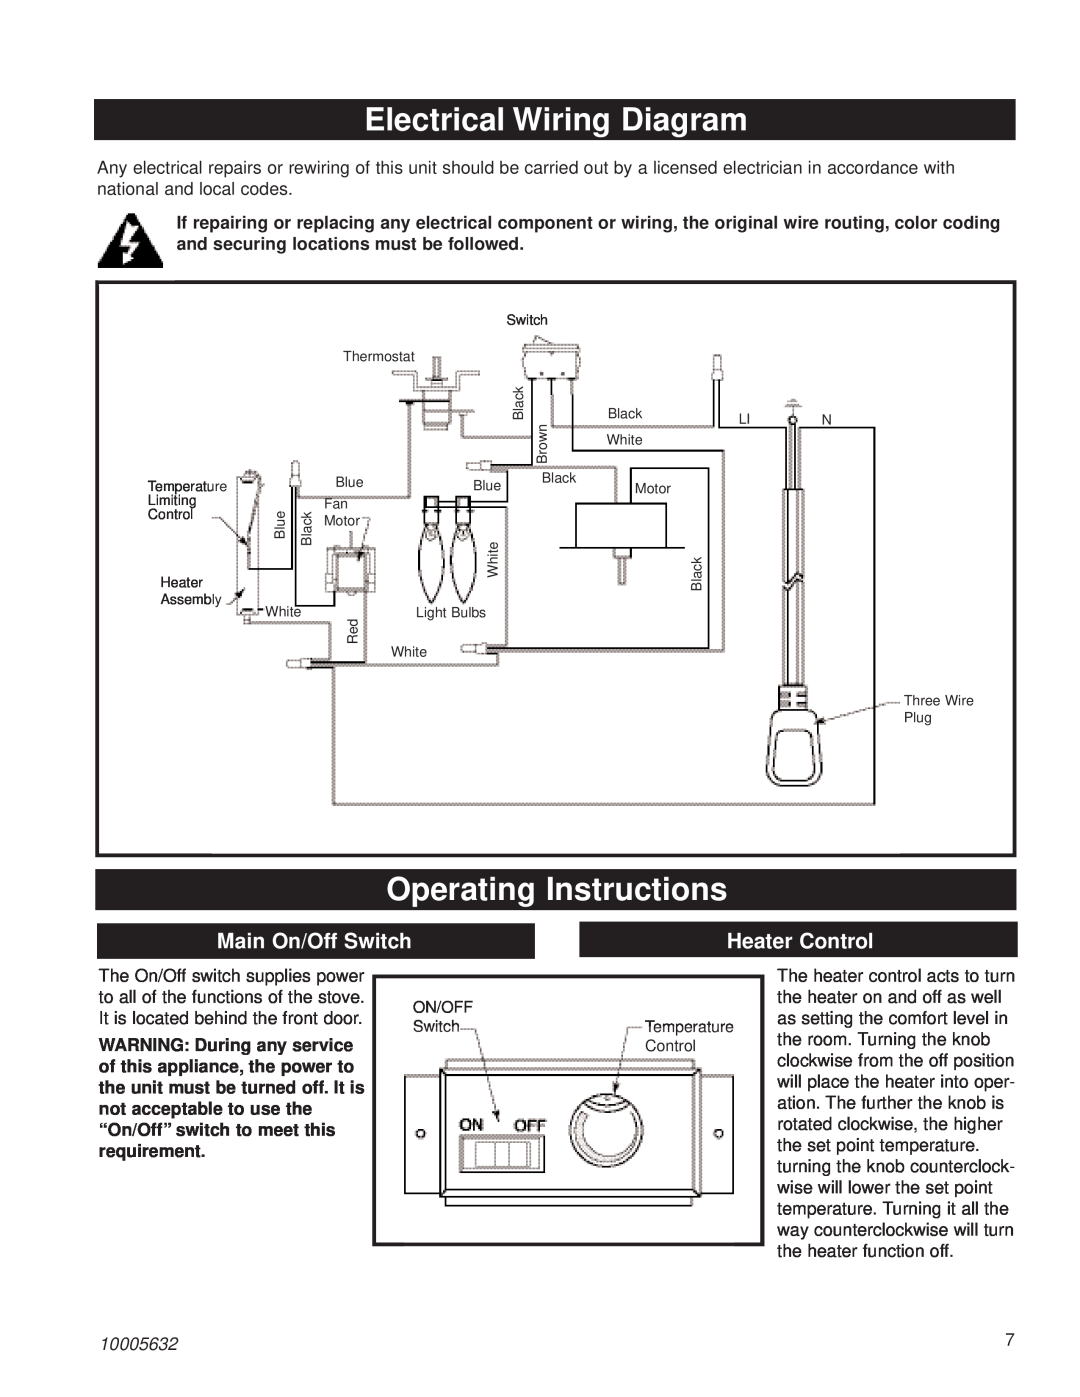 Kenwood HES20 Electrical Wiring Diagram, Operating Instructions, Main On/Off Switch, Heater Control, 10005632 